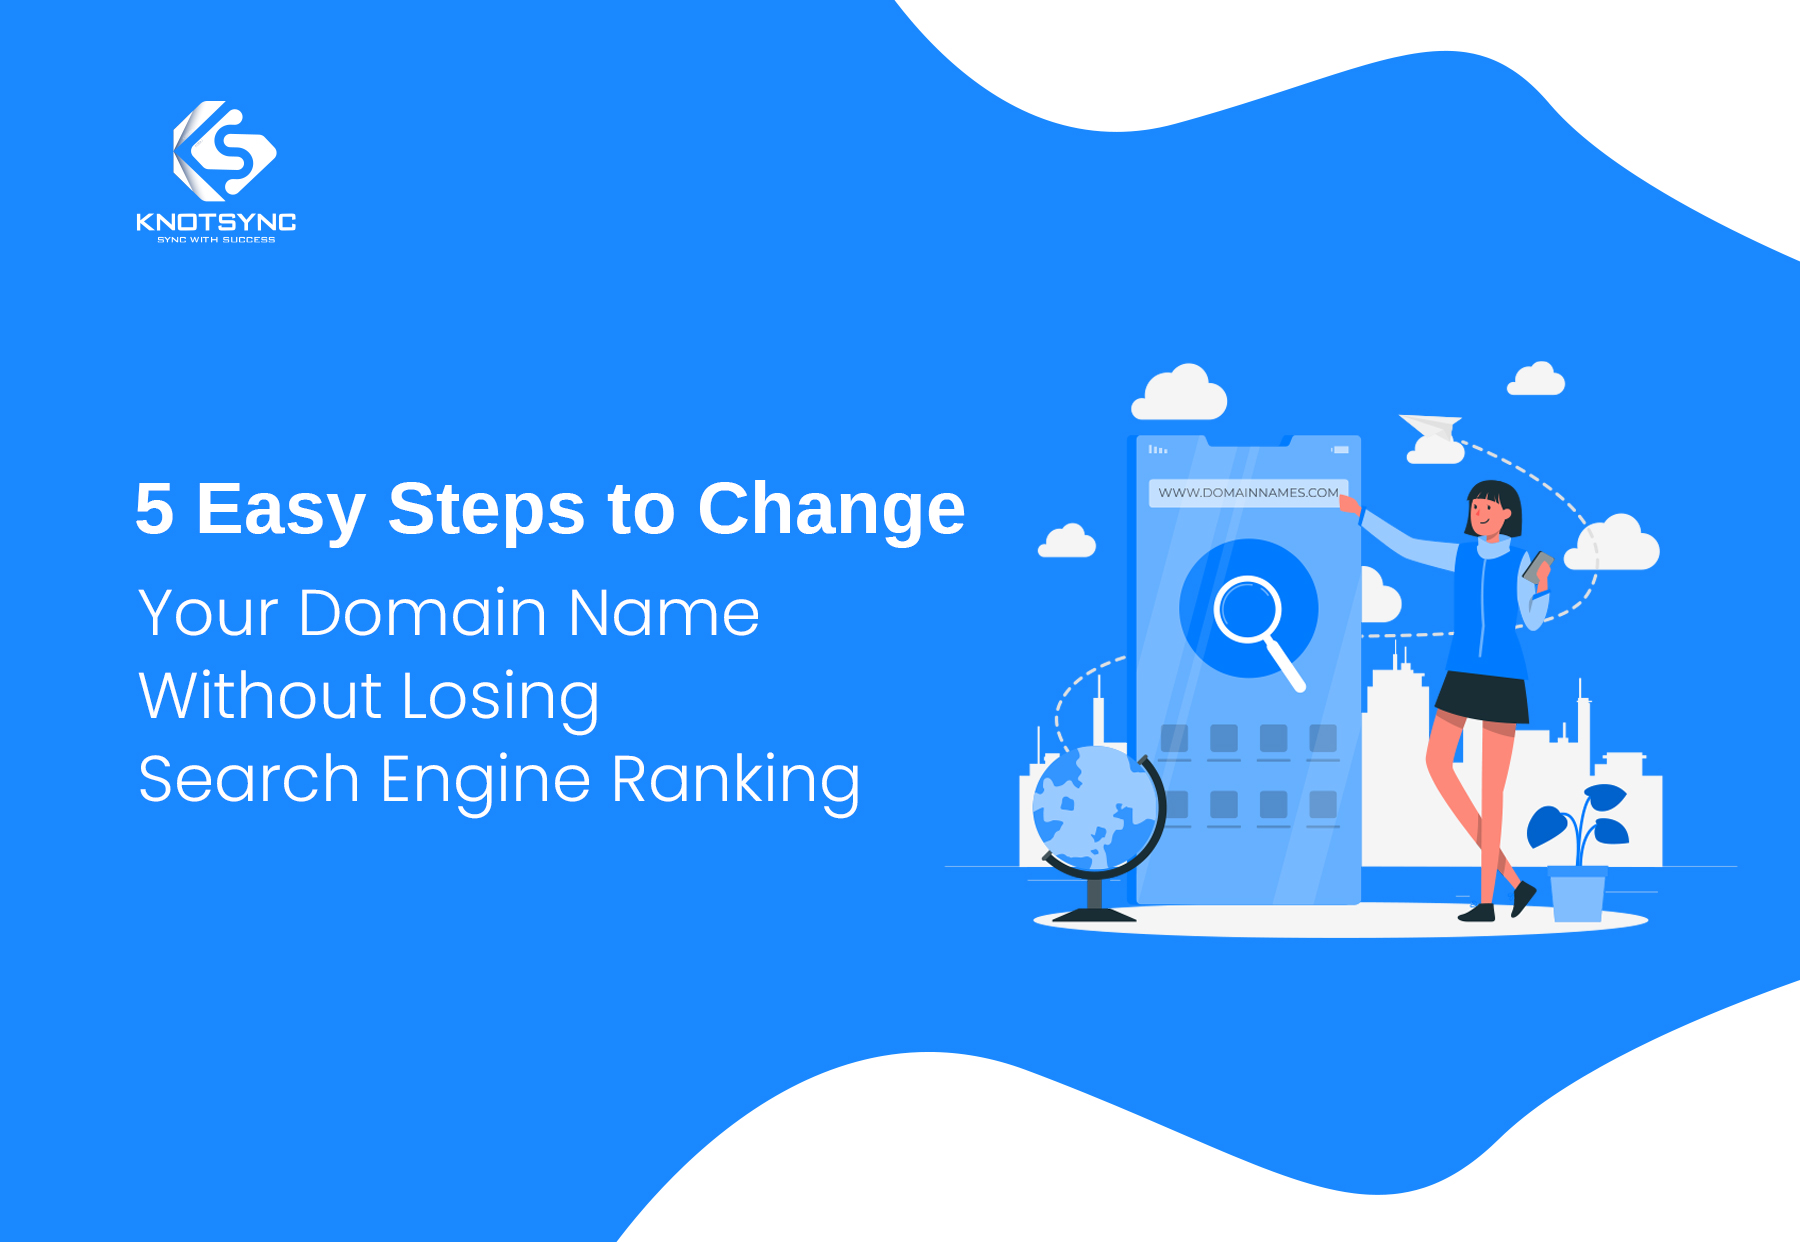 5 Easy Steps to Change Your Domain Name Without Losing Search Engine Ranking